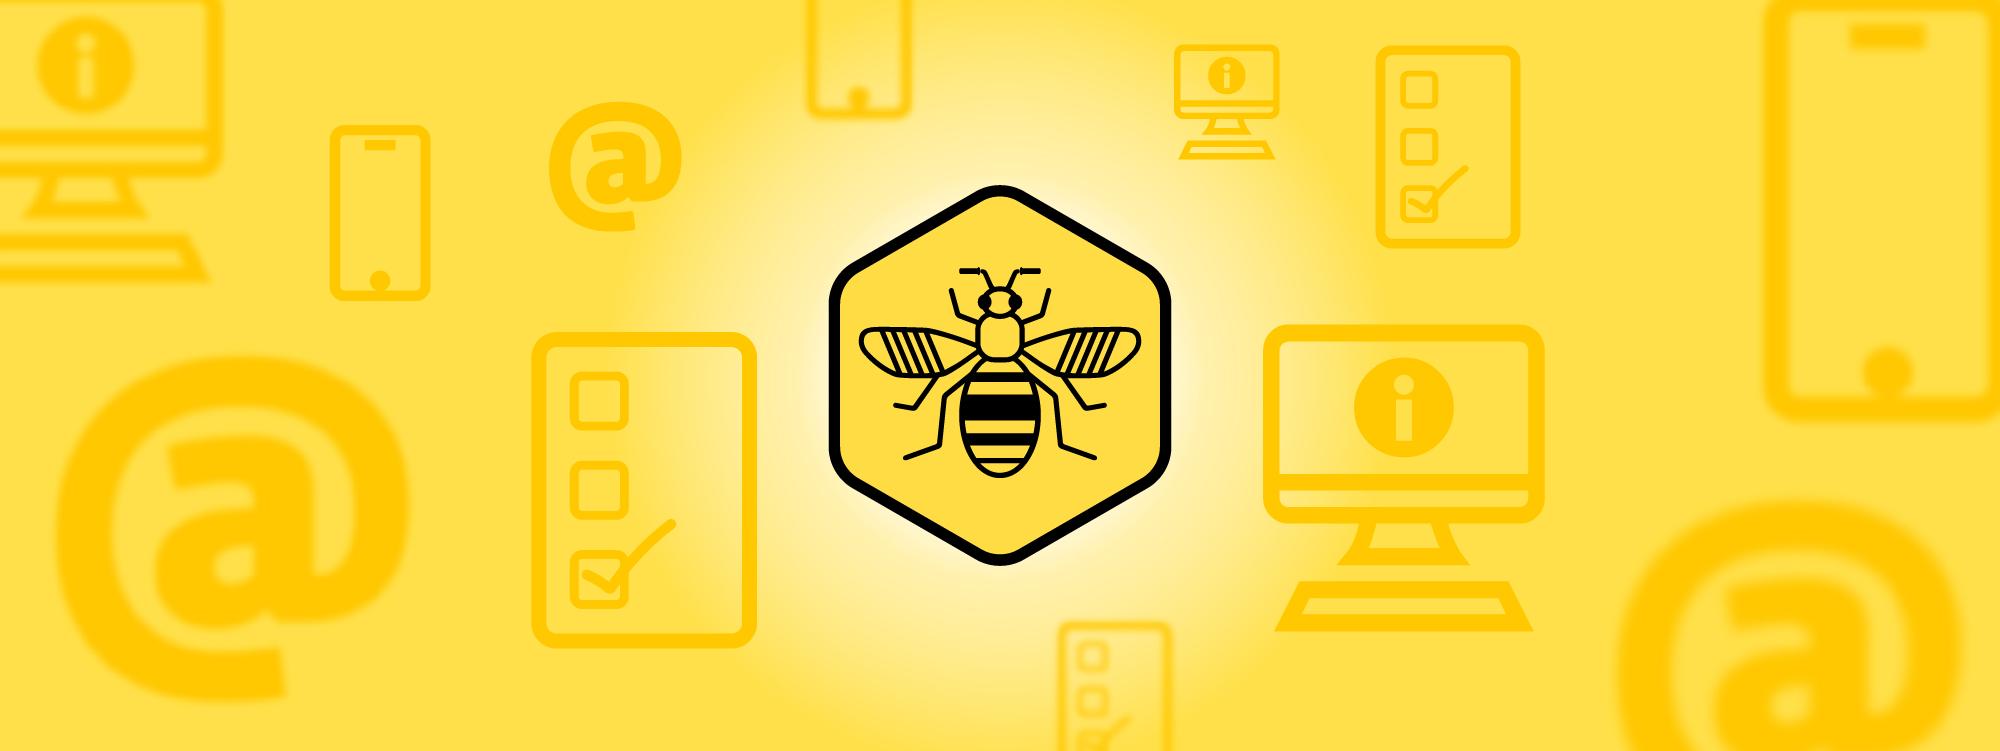 The bee network logo with icons